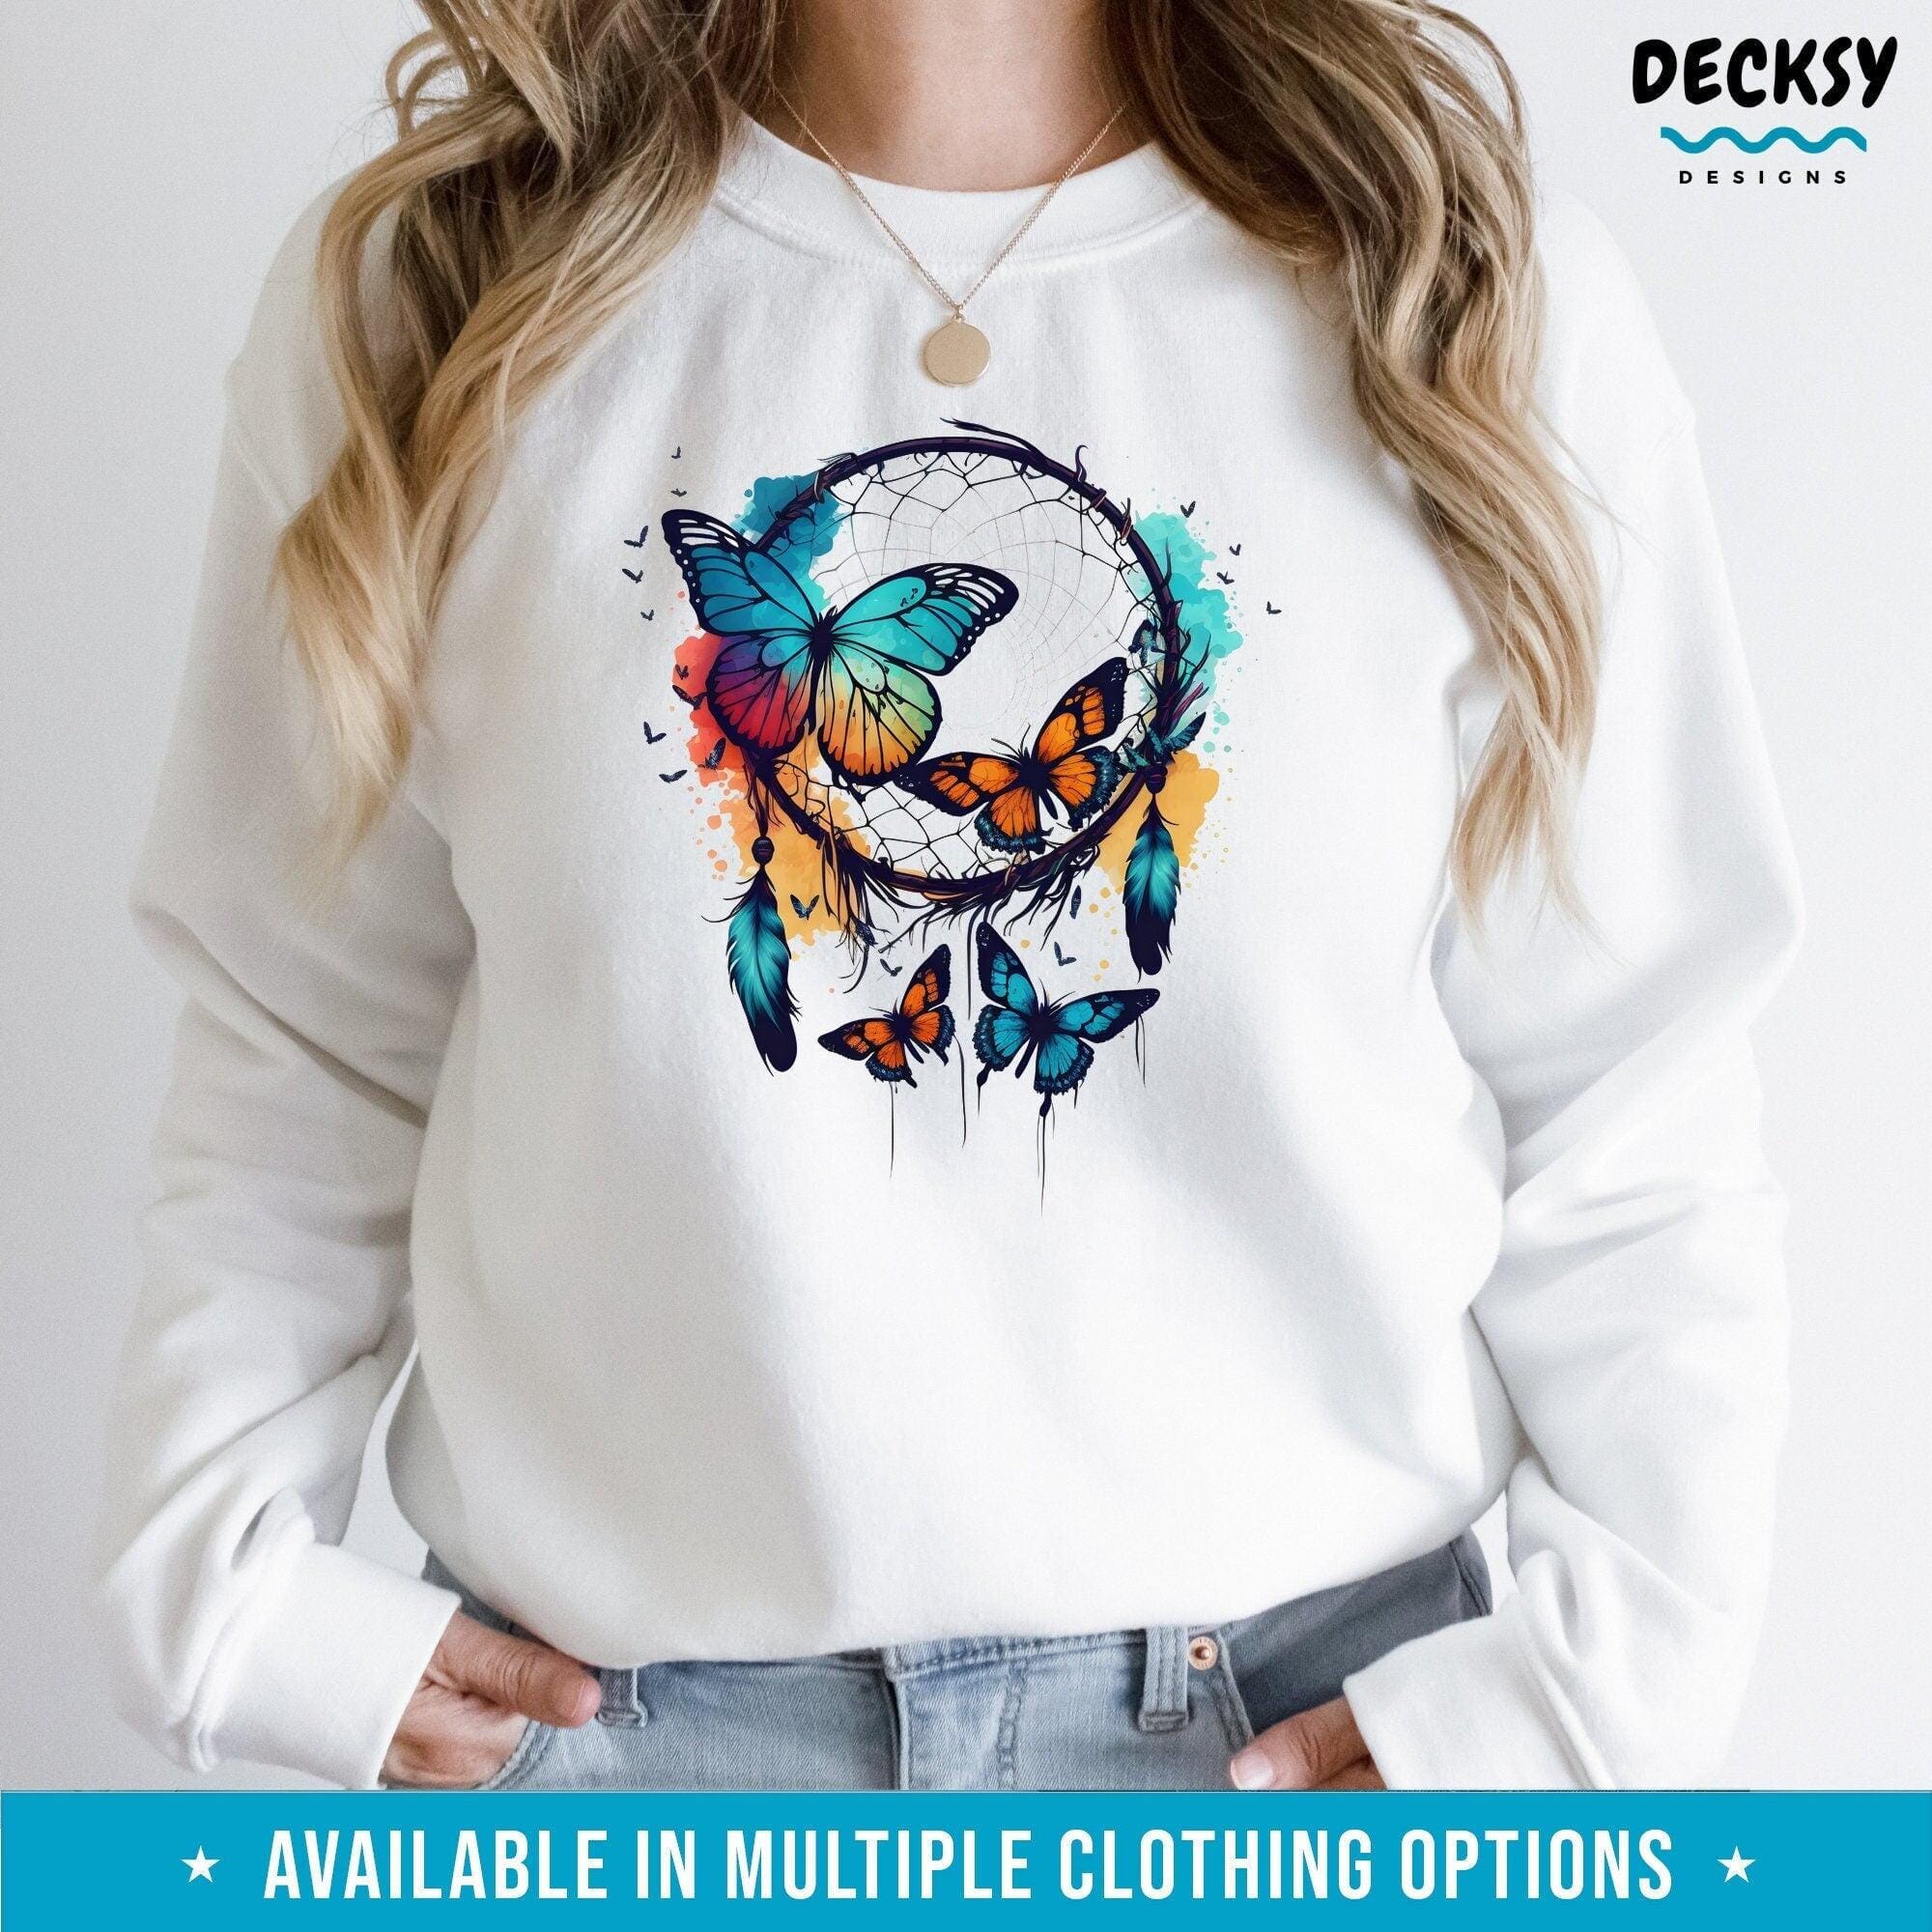 Dreamcatcher Shirt, Butterfly Tshirt Gift-Clothing:Gender-Neutral Adult Clothing:Tops & Tees:T-shirts:Graphic Tees-DecksyDesigns